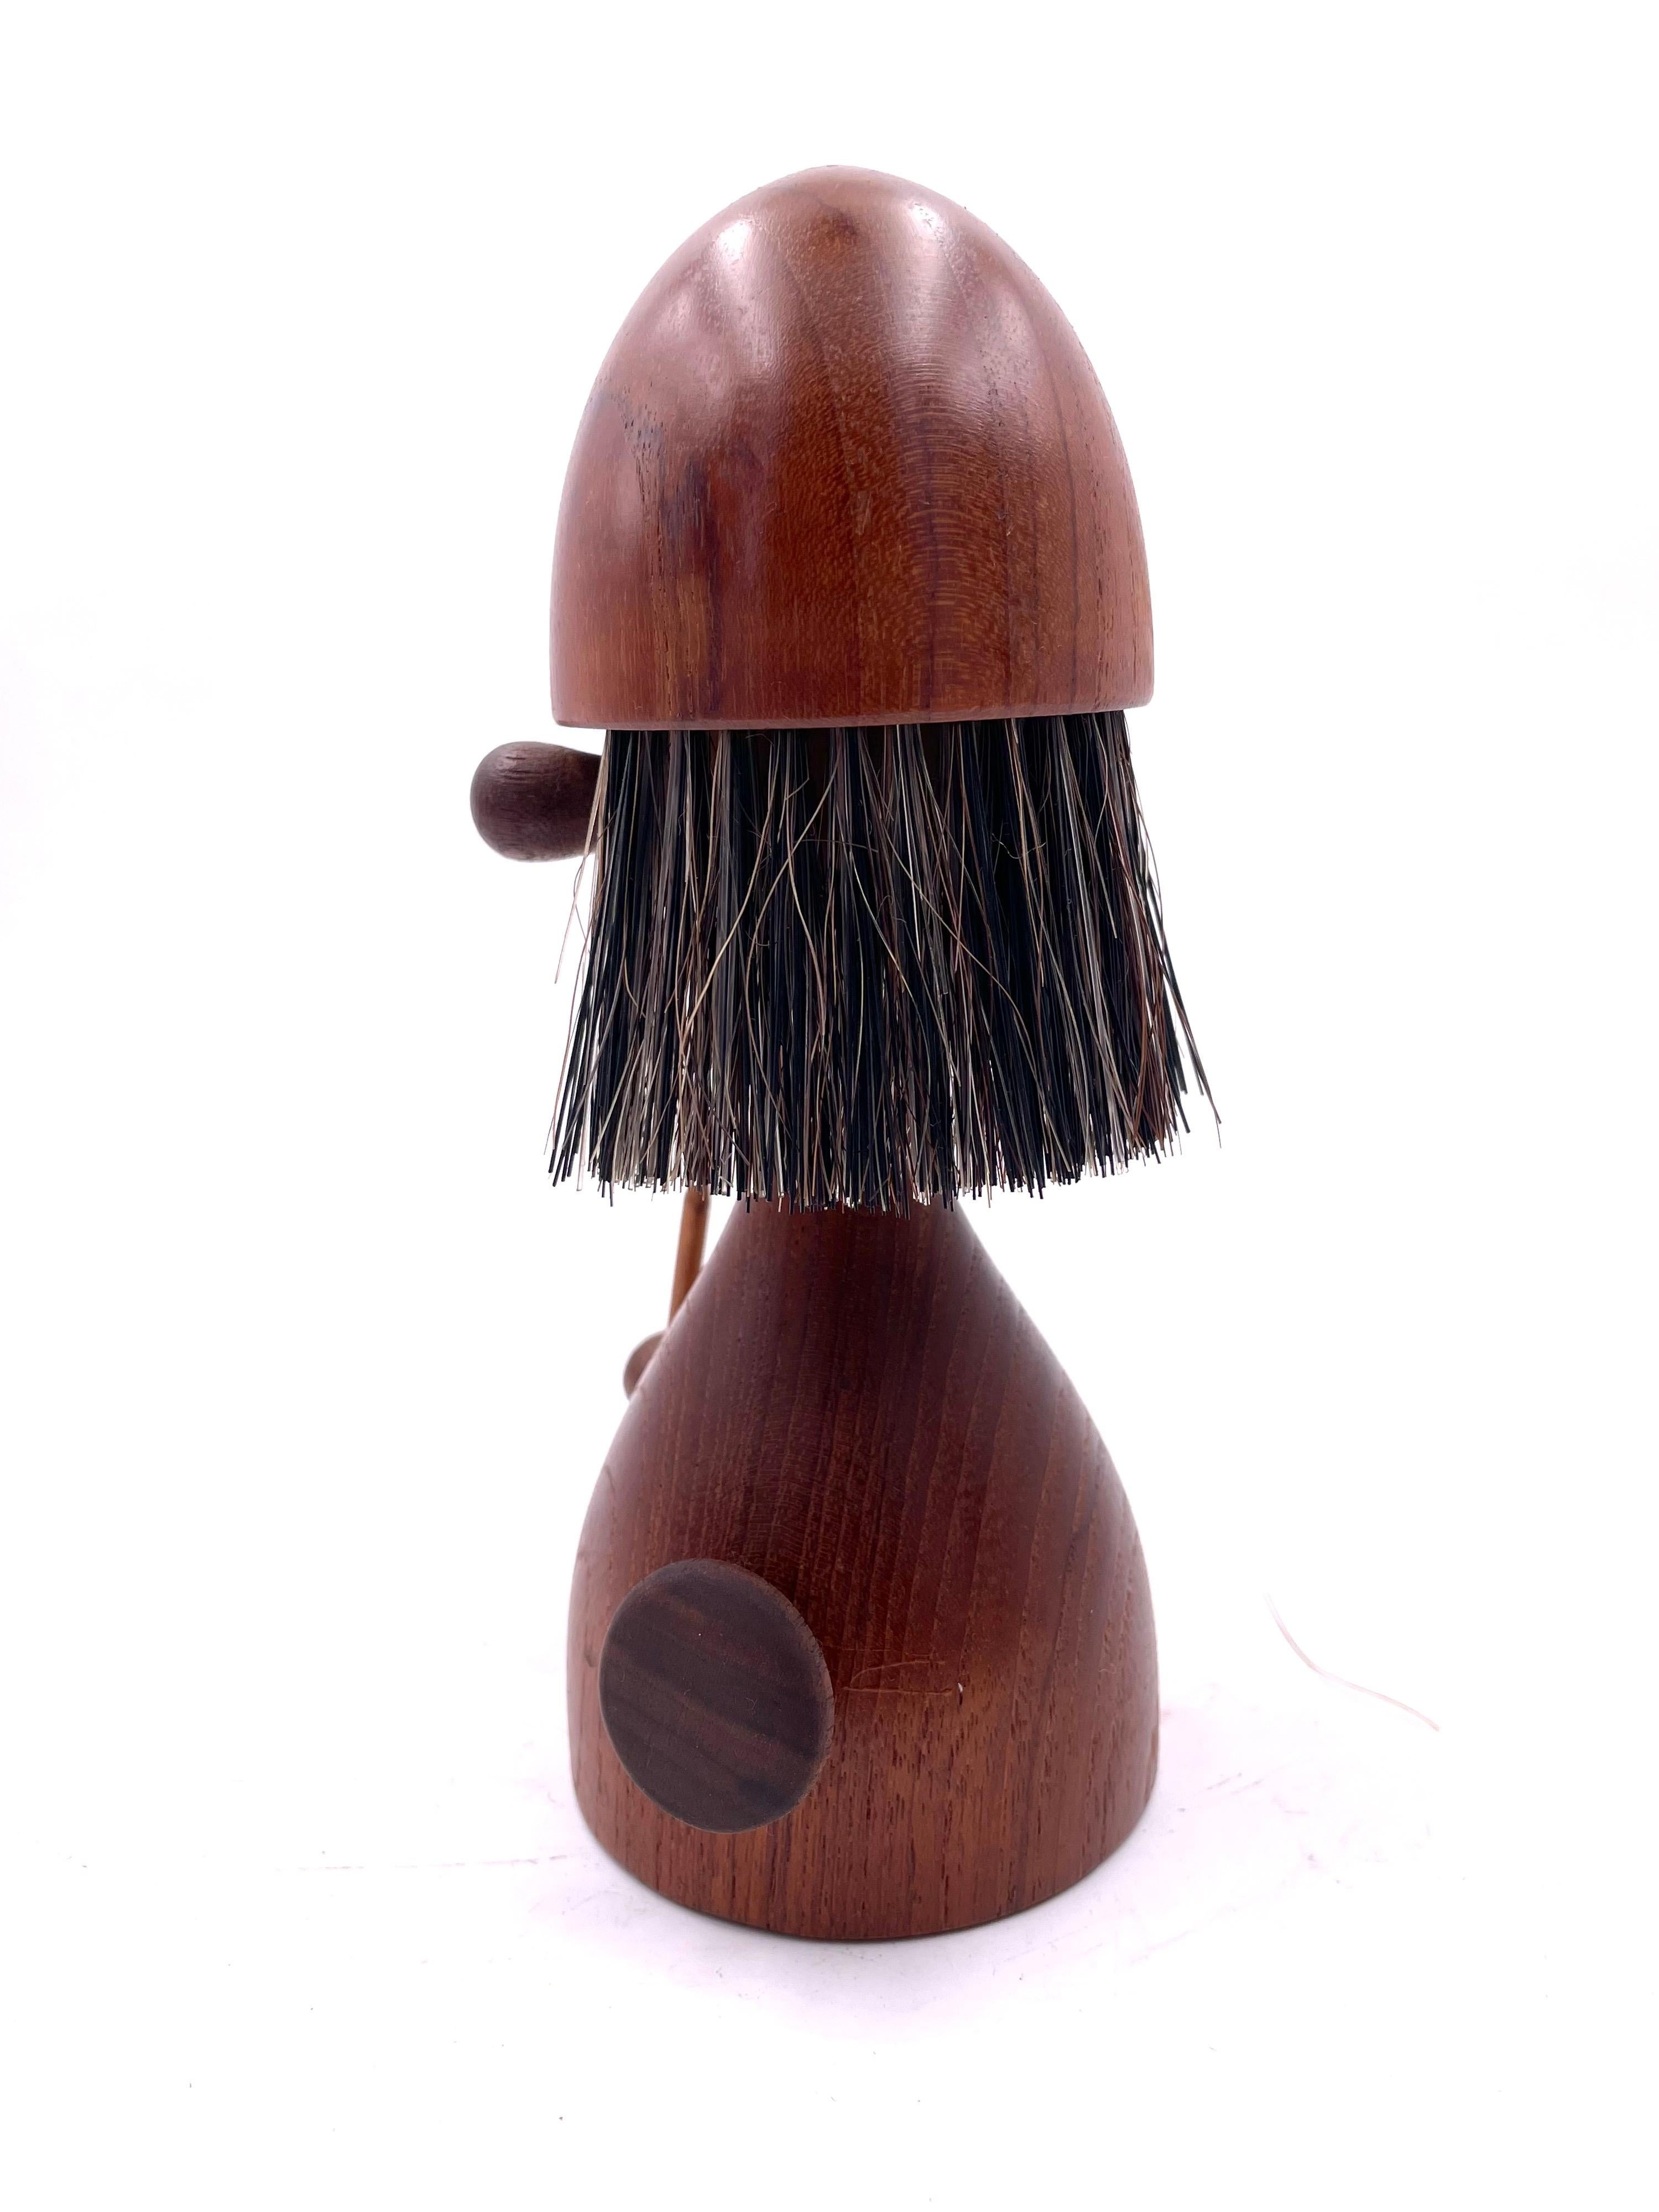 Very cool Viking clothes brush by Laurids Longborg, circa 1950's this piece its a sculpture by itself made of solid teak and mixed woods. a great piece of conversation.